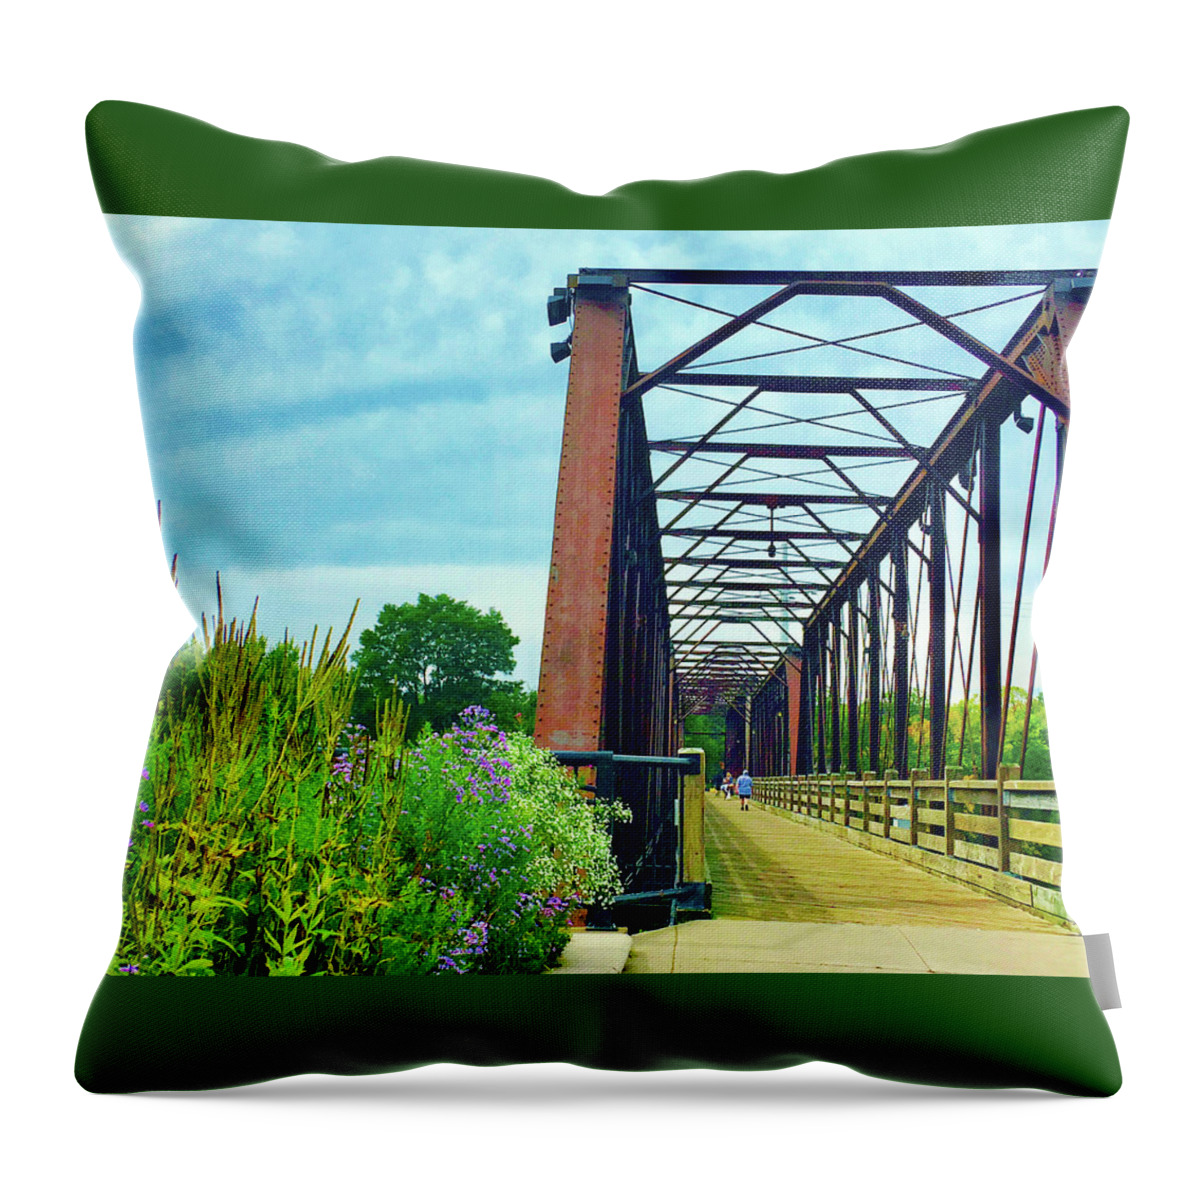 Nature Throw Pillow featuring the photograph Railroad Bridge Garden by Rod Whyte